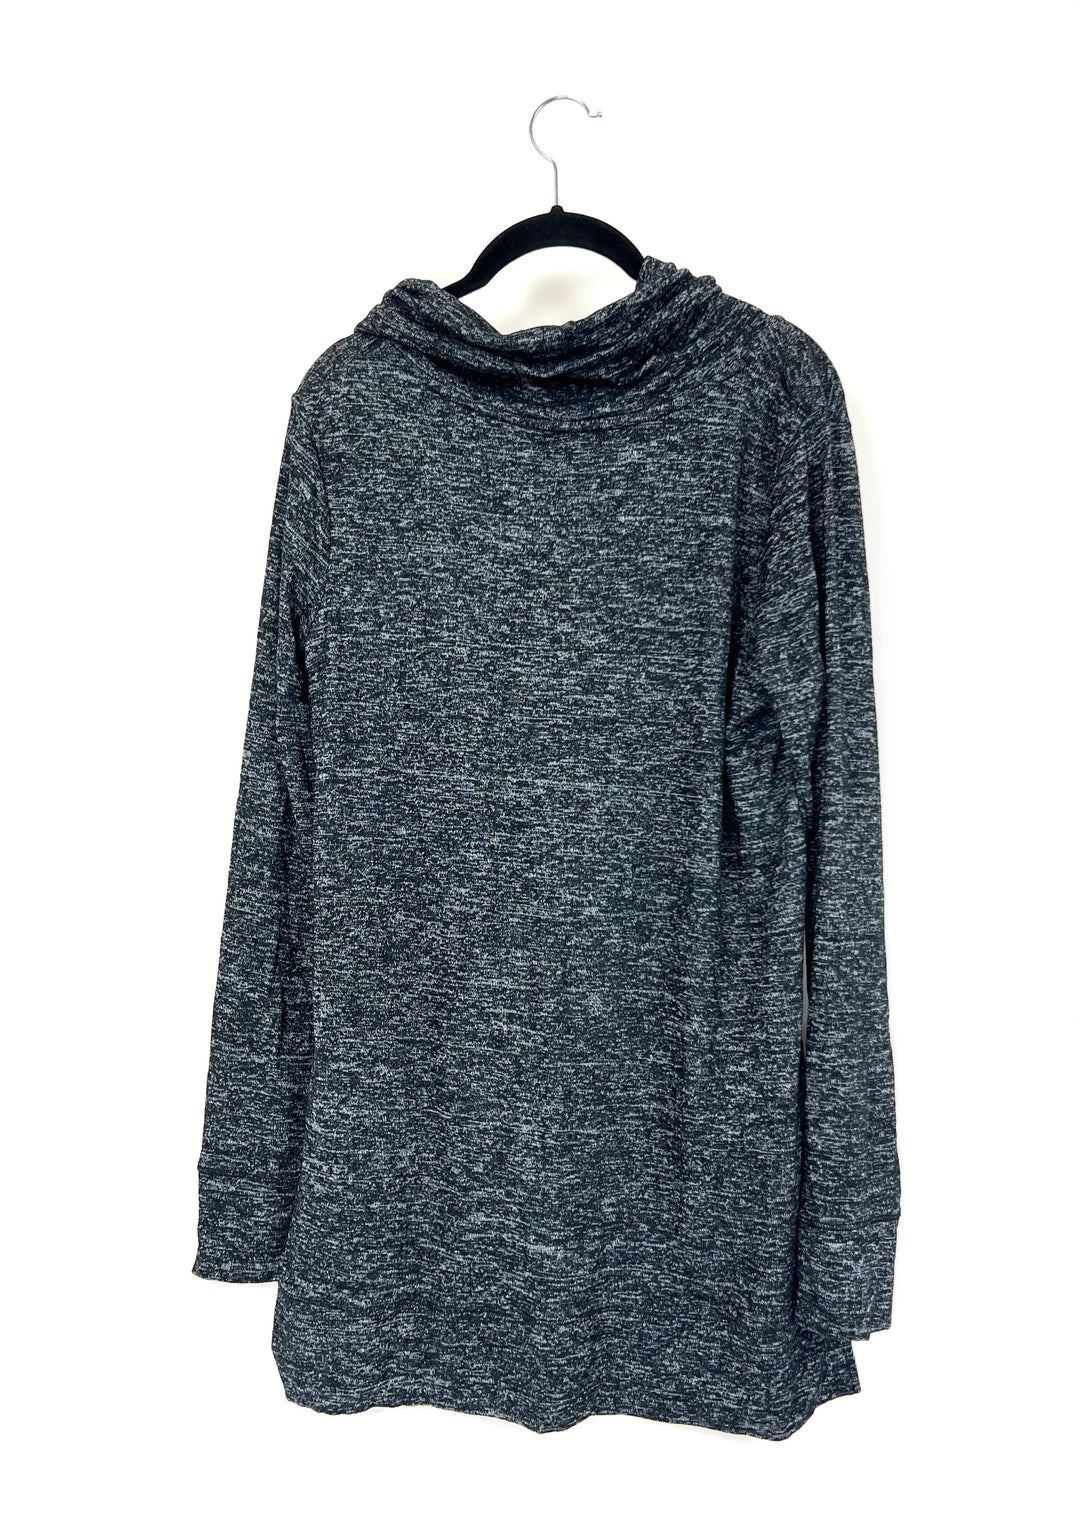 Comfy Black Long Sleeve Cowl Neck Top - Small